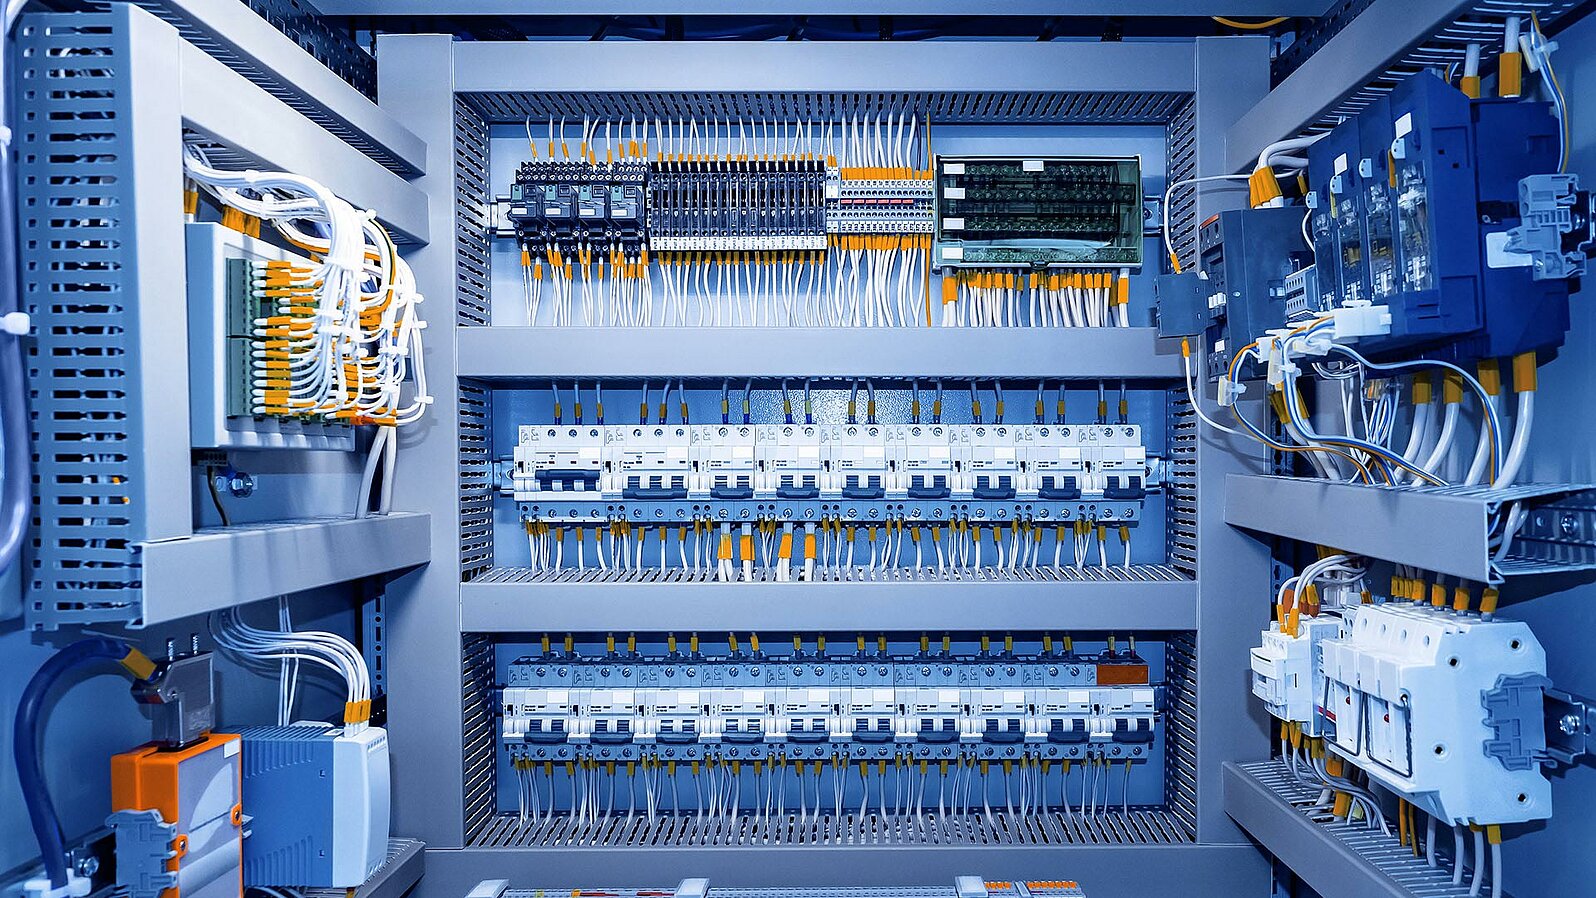 Switchboard,Equipment.,Shield,For,Enterprise,Automation.,Concept,-,Equipment,For